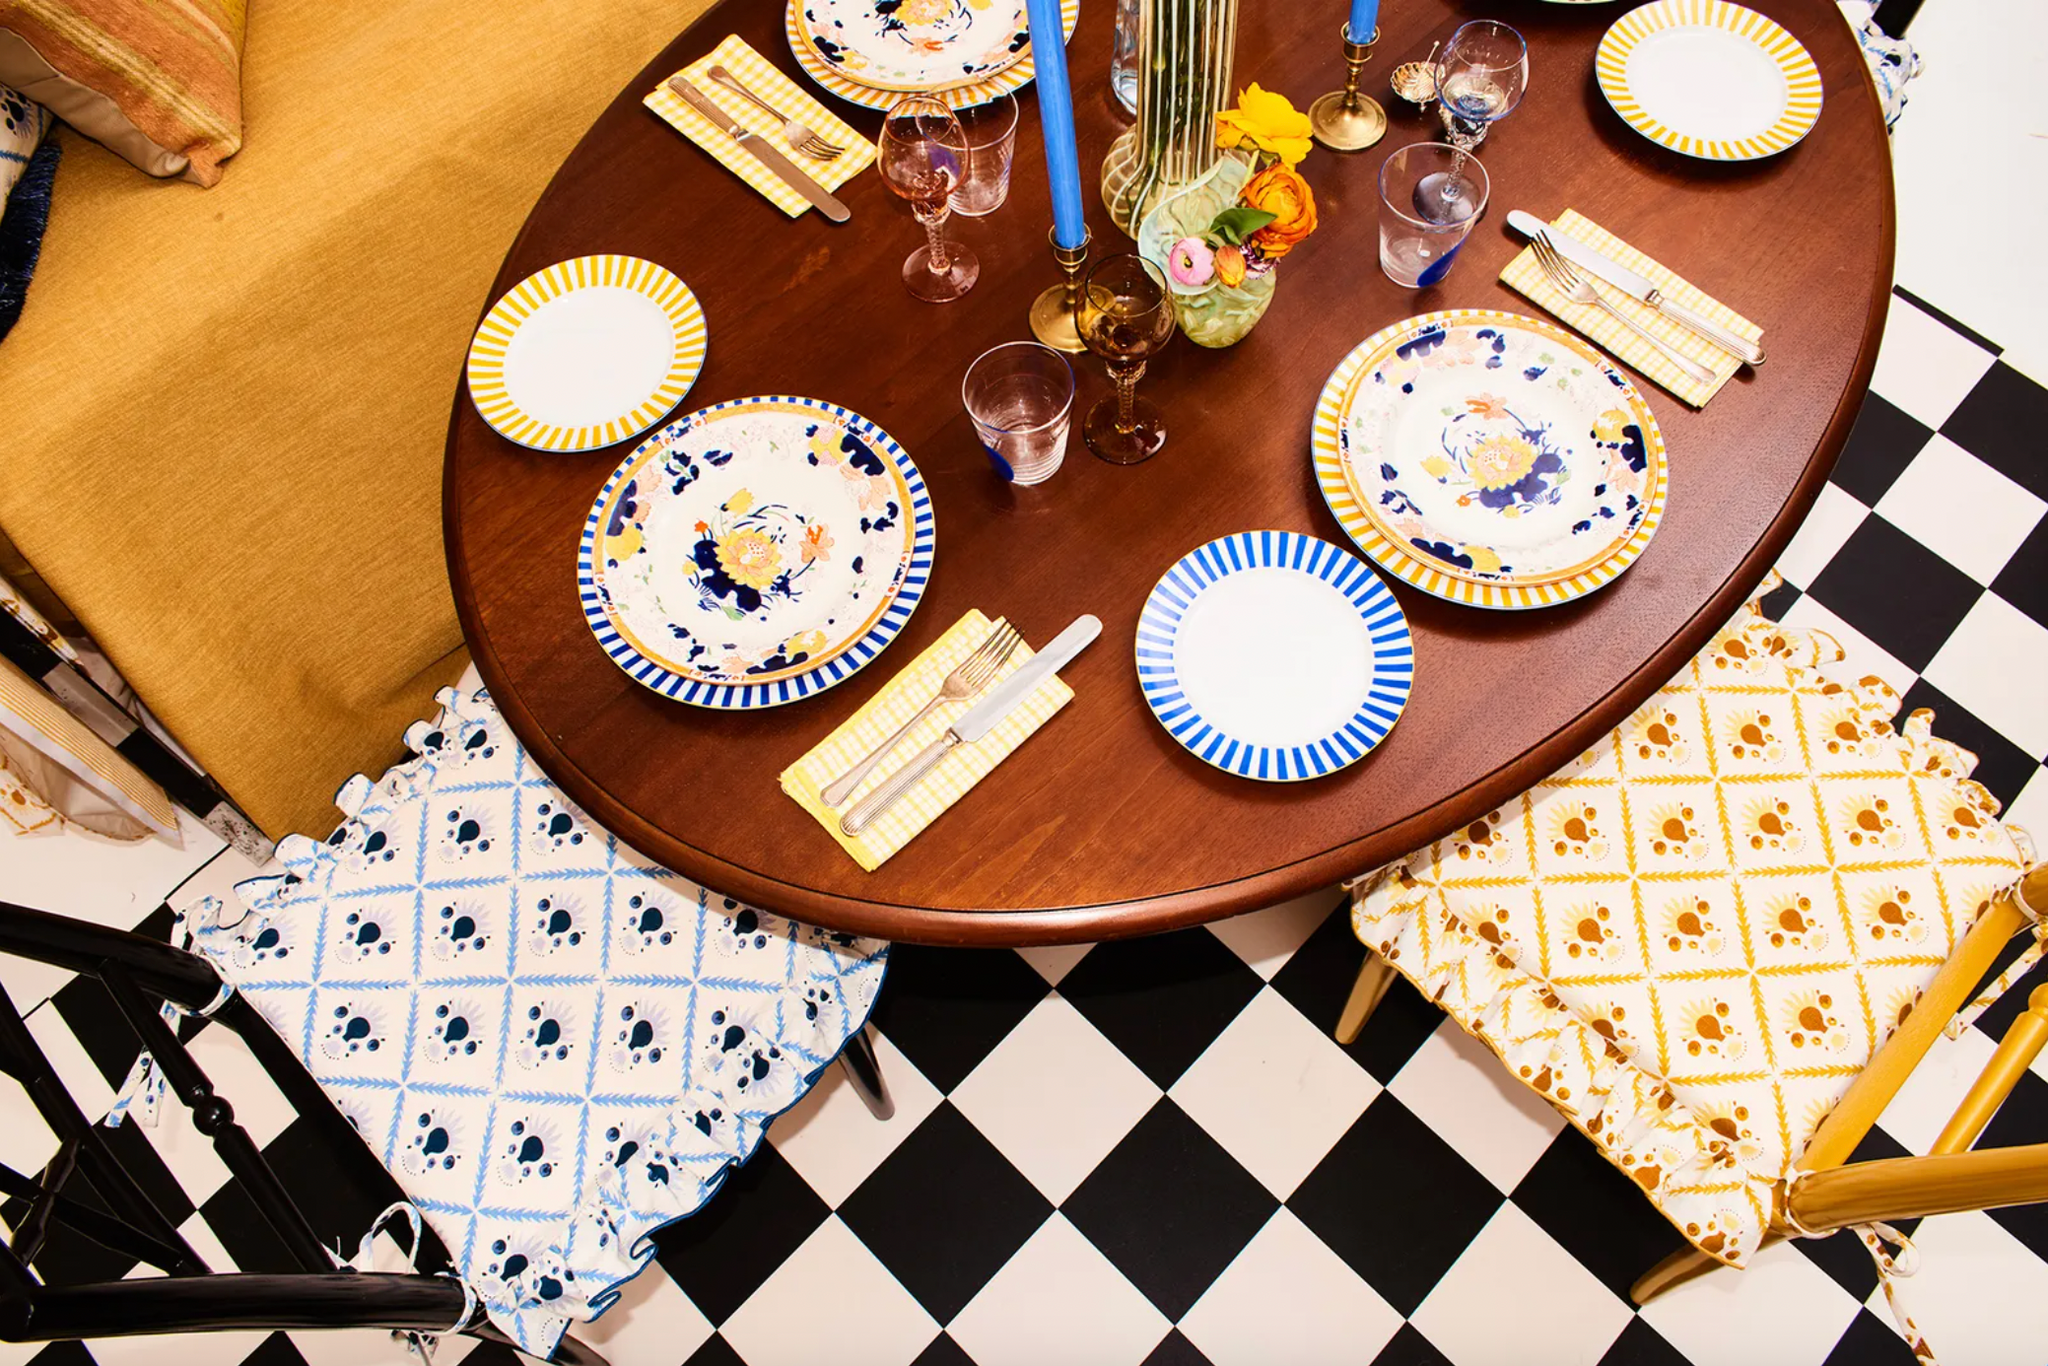 Round wooden dining table set with patterned crockery and blue tapered candles, with blue and yellow prints chairs and a chequered flooring